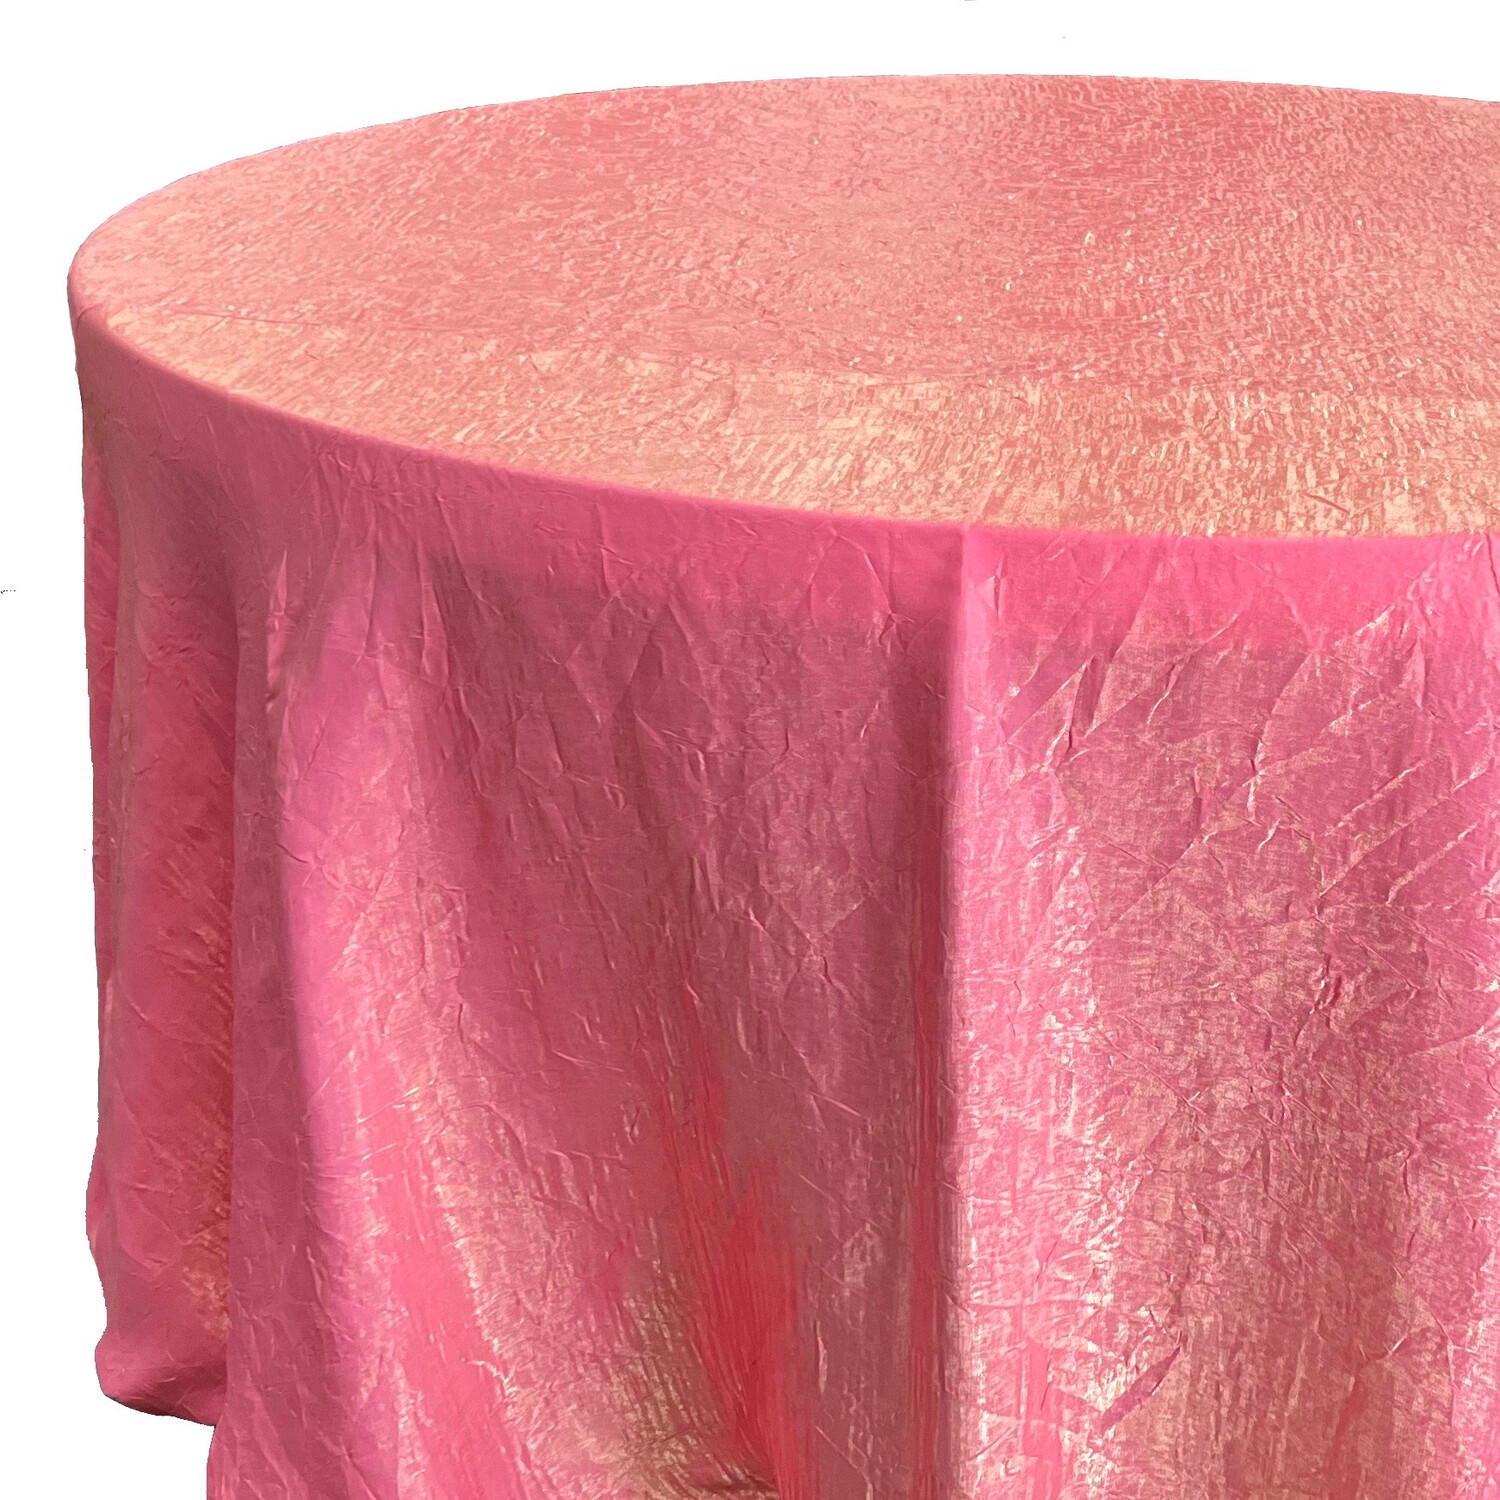 Rose Gold (Coral) Crushed Iridescent Satin Linens